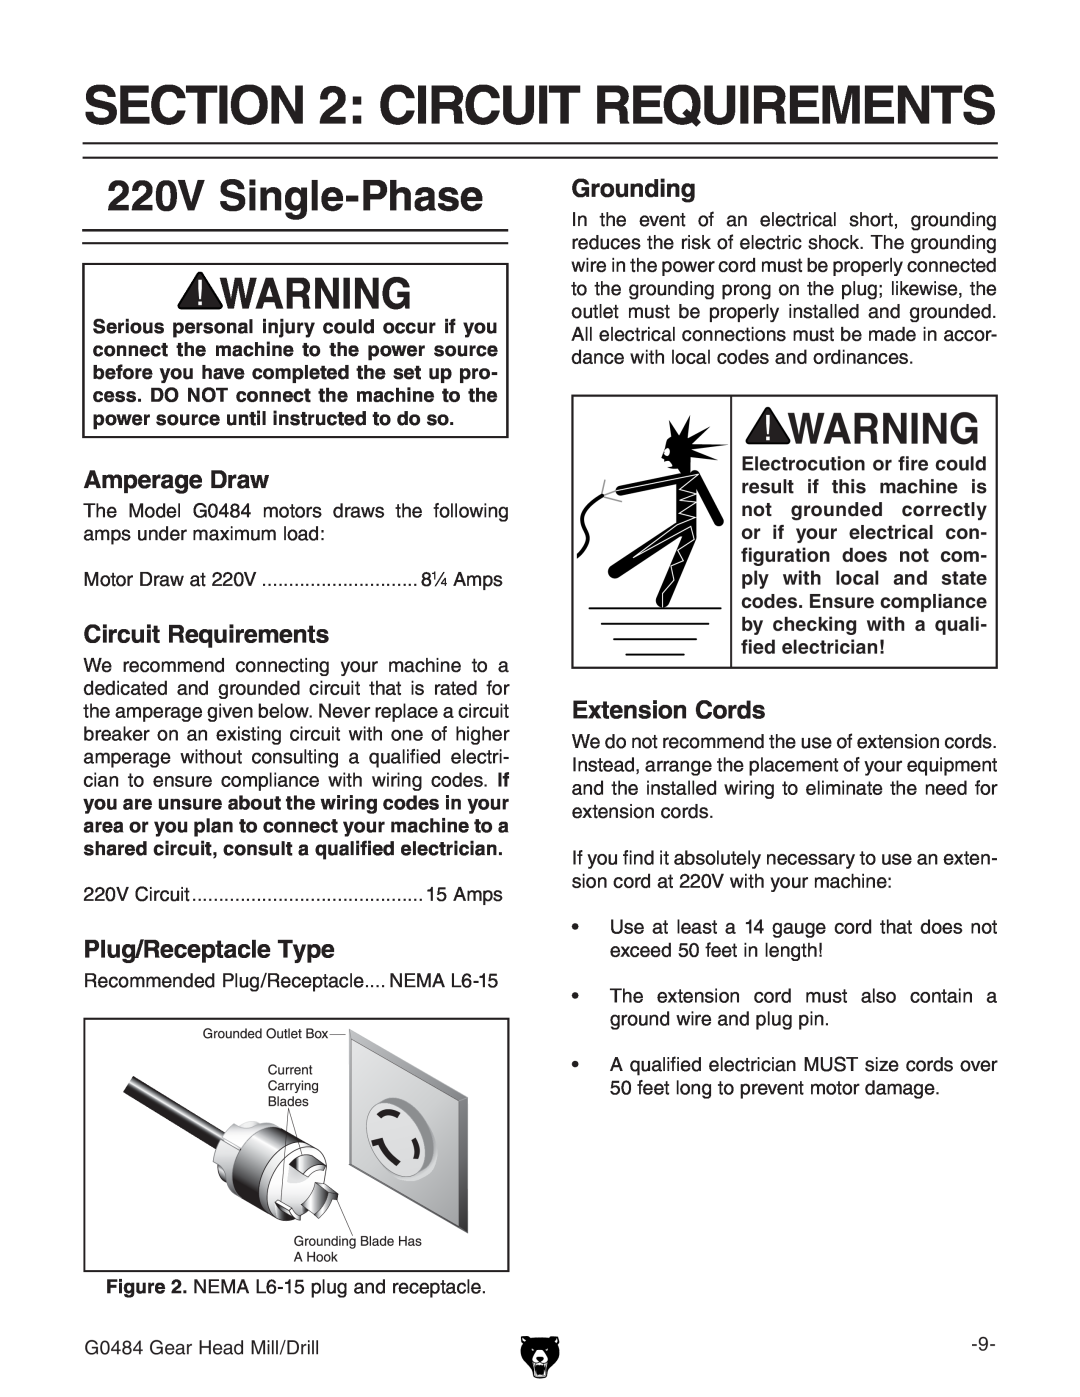 Grizzly G0484 Circuit Requirements, 220V Single-Phase, Amperage Draw, Plug/Receptacle Type, Grounding, Extension Cords 